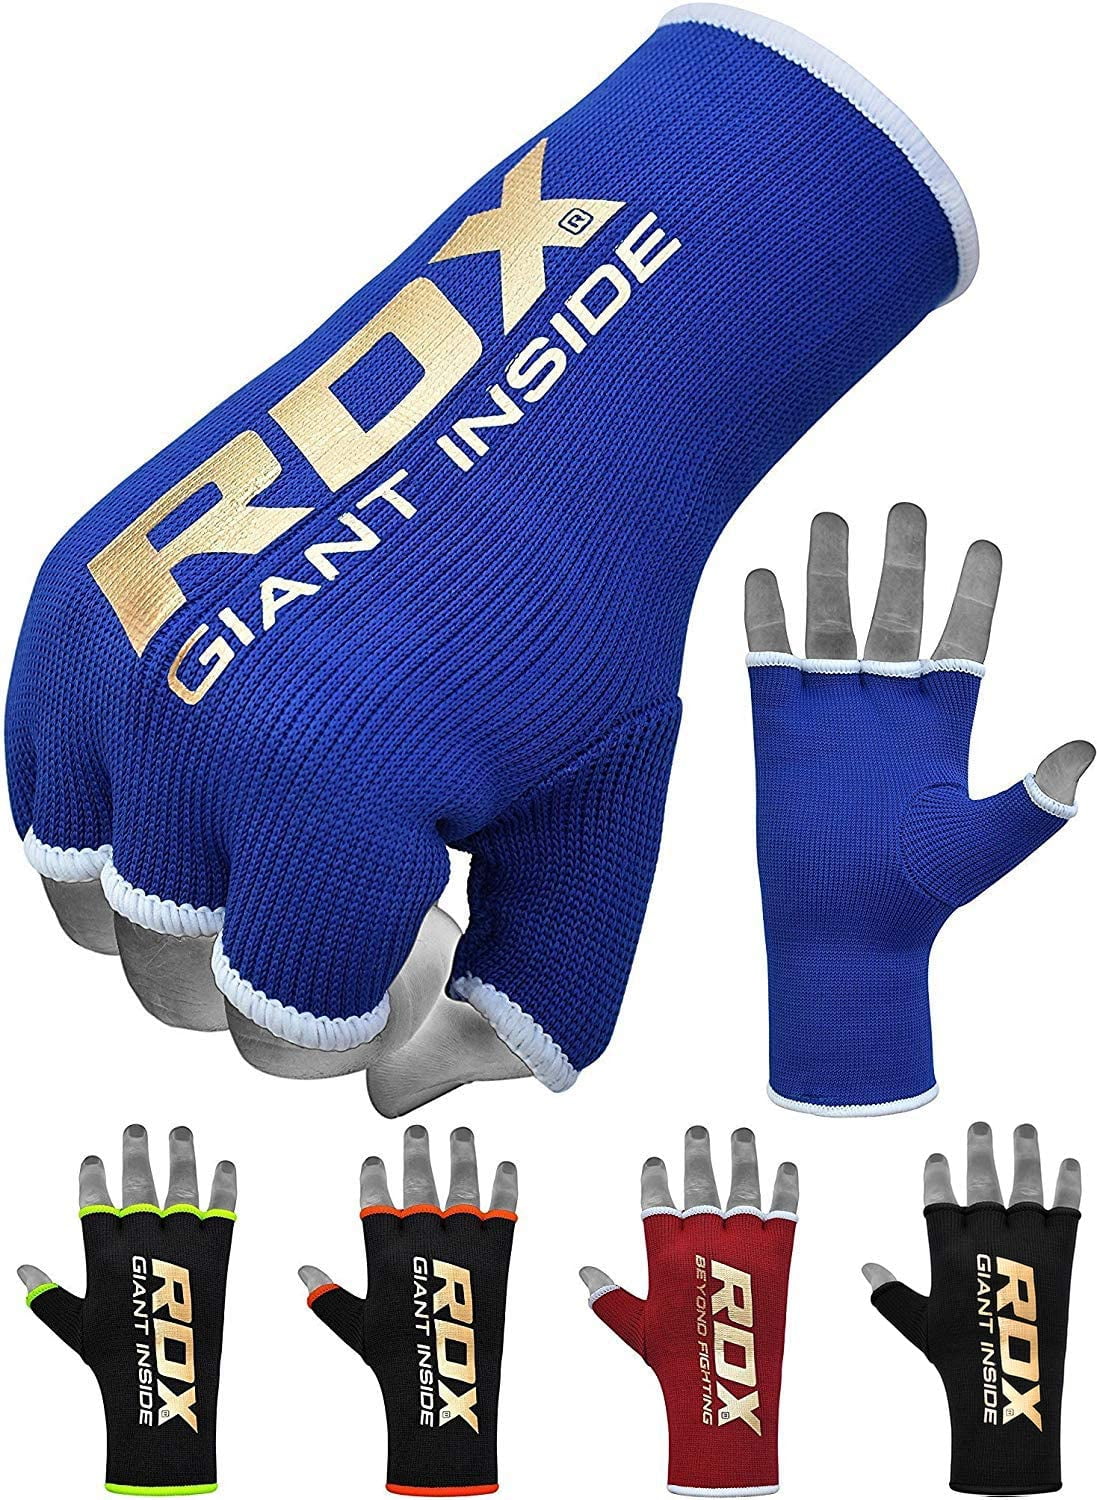 Great for MMA Kickboxing RDX Boxing Hand Wraps Inner Gloves for Punching Muay Thai Martial Arts Training & Combat Sports Half Finger Elasticated Bandages under Mitts Fist Protection